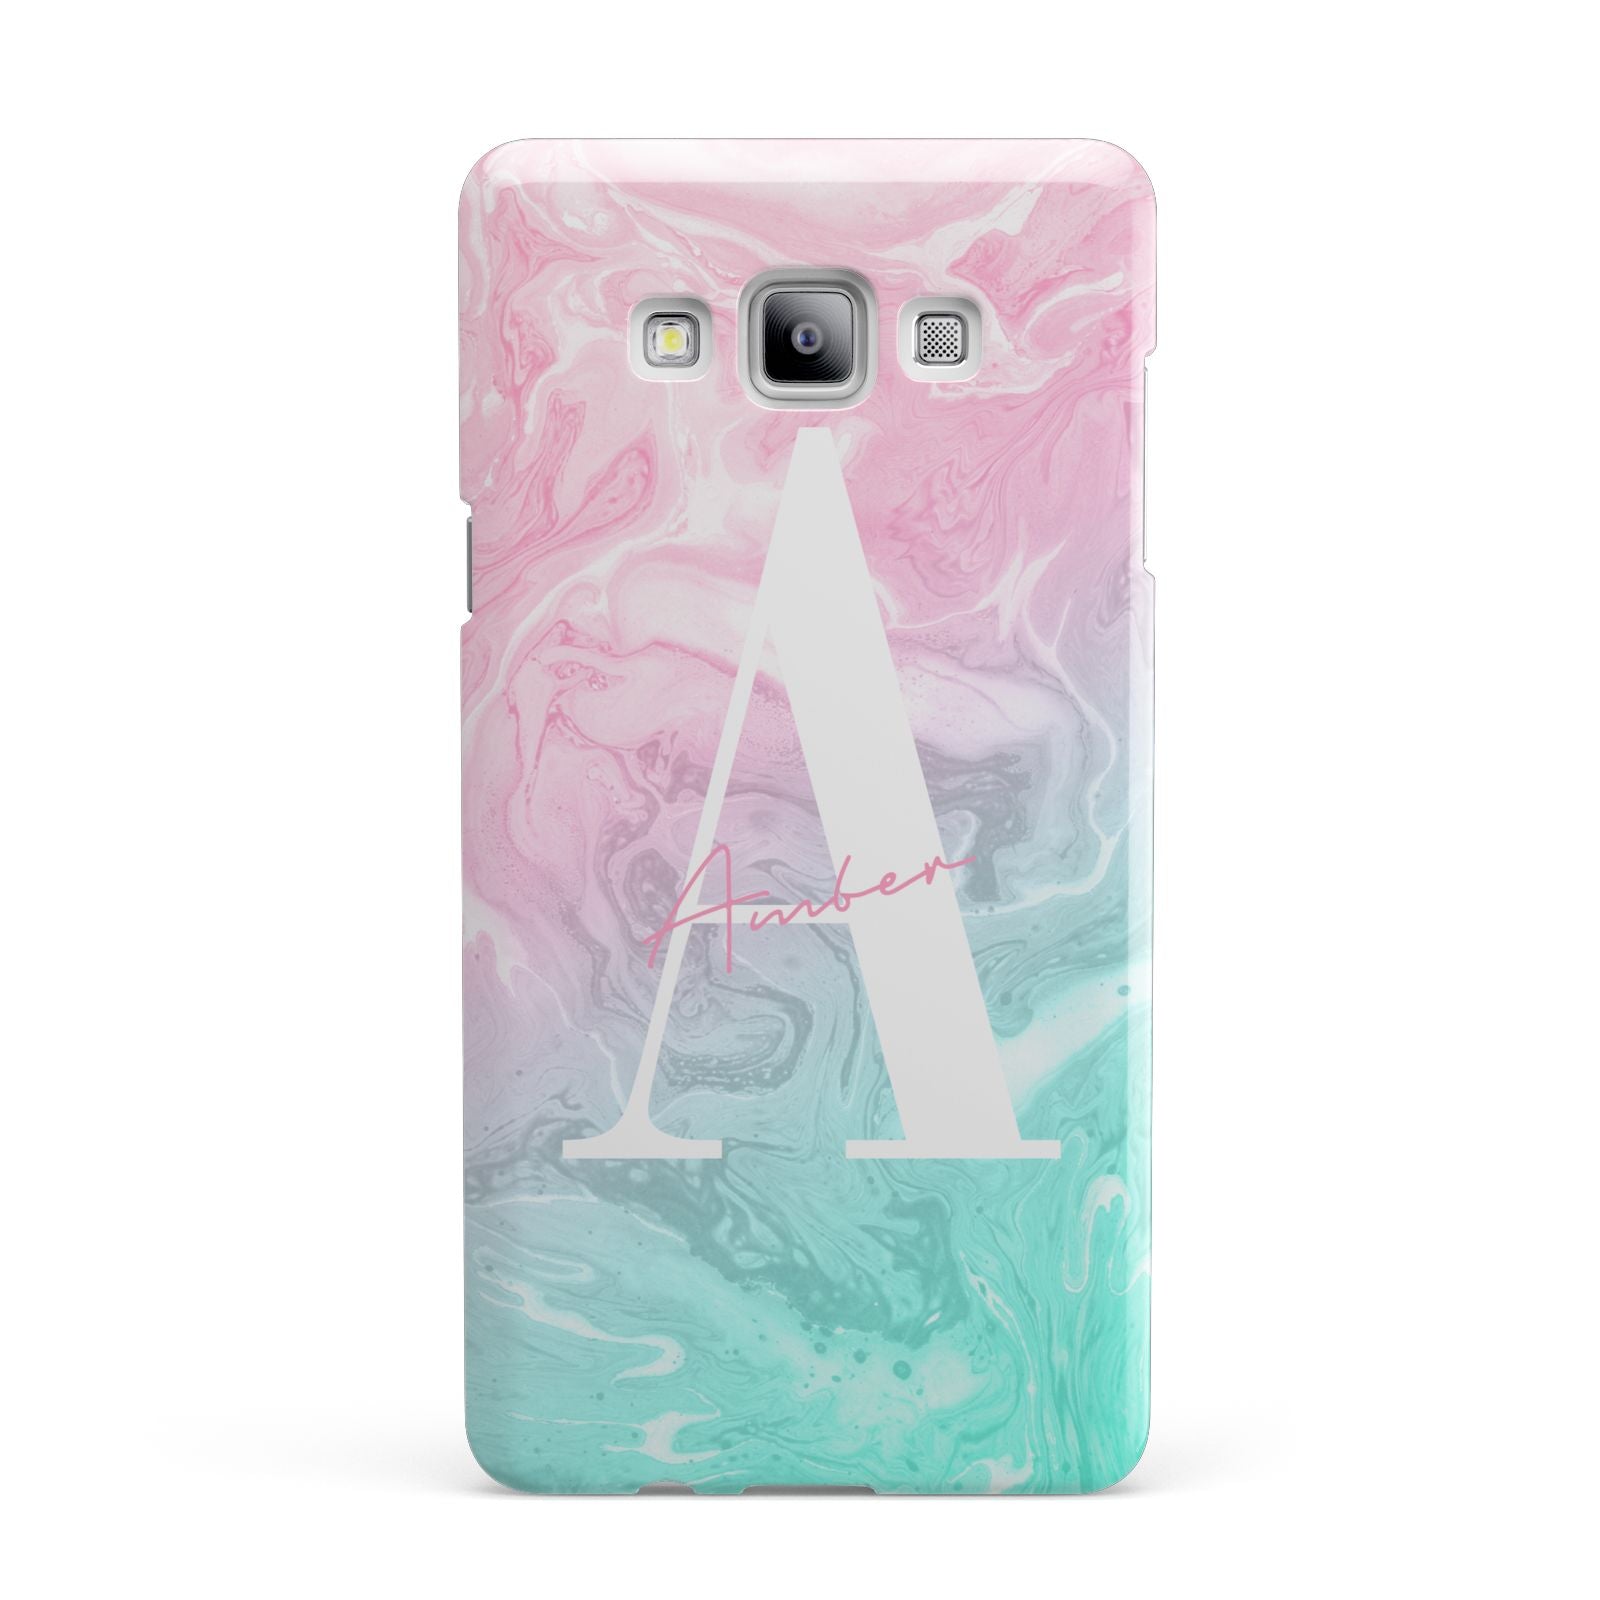 Monogrammed Pink Turquoise Pastel Marble Samsung Galaxy A7 2015 Case